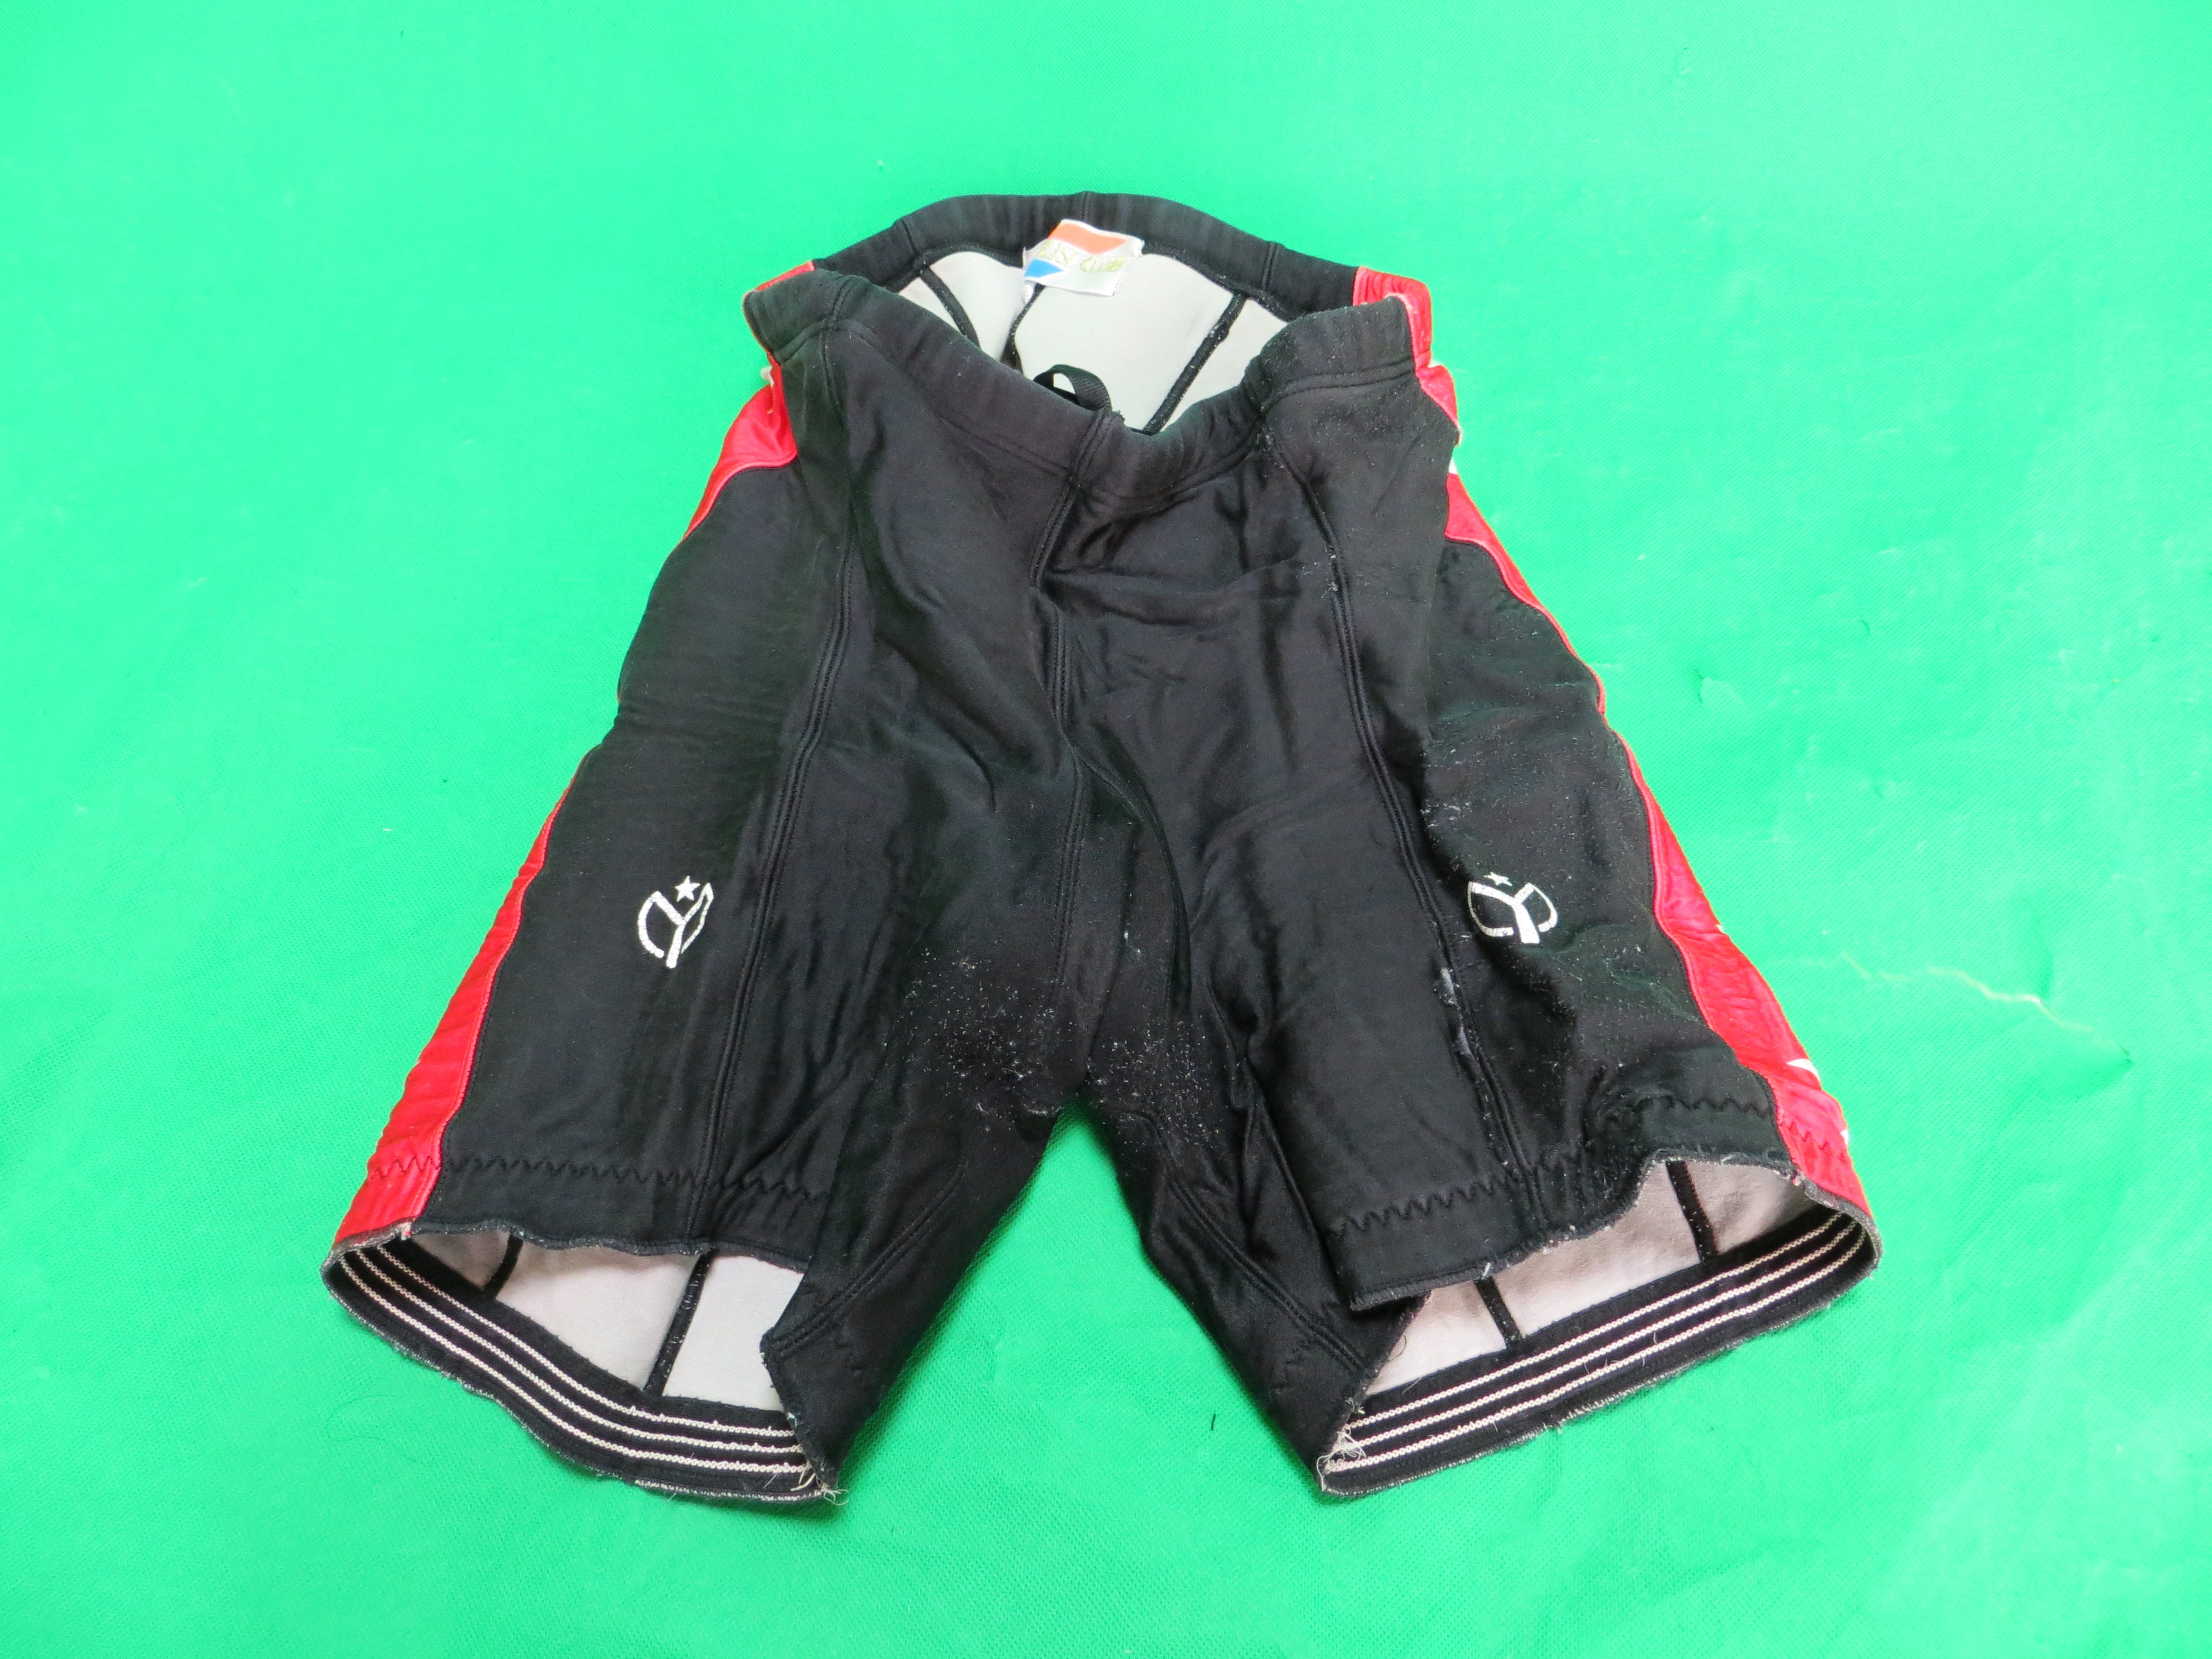 Medalist Club Authentic Keirin Shorts Japanese L Size  (American M)